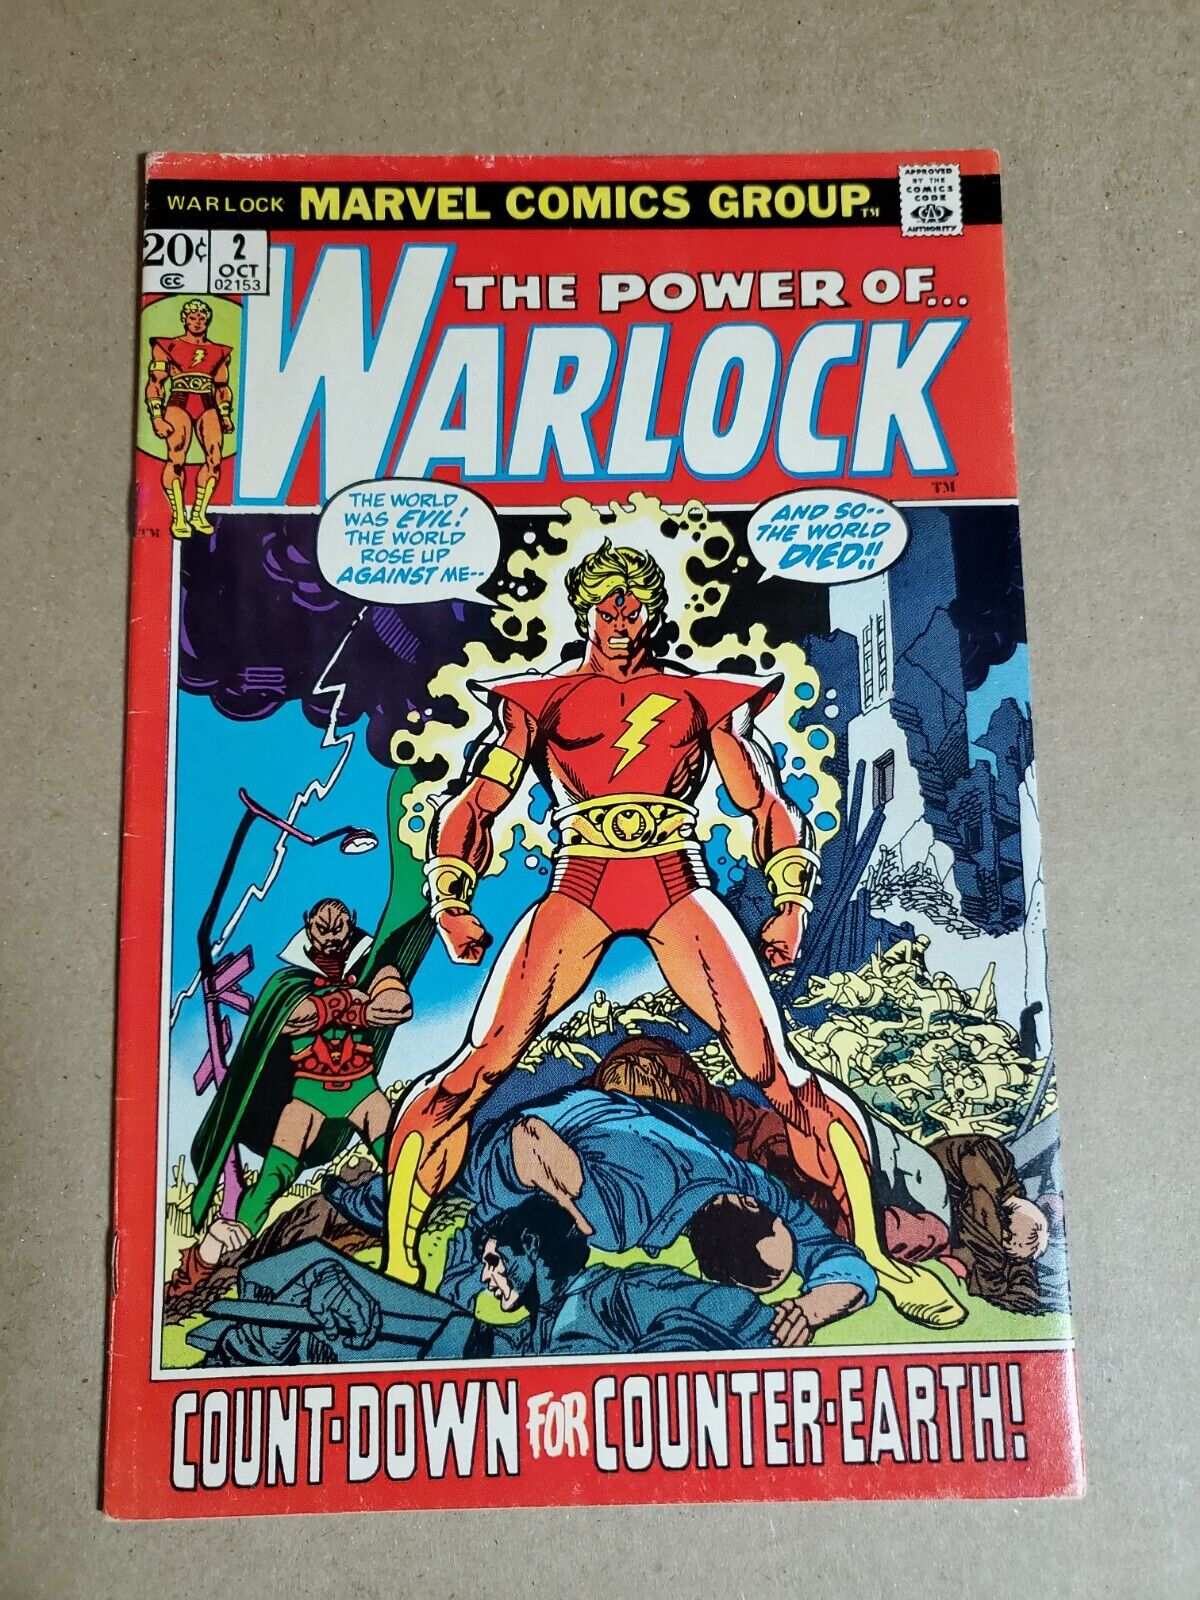 WARLOCK #2 (VG) 1972 Iconic cover by Gil Kane BRONZE AGE MARVEL COMICS